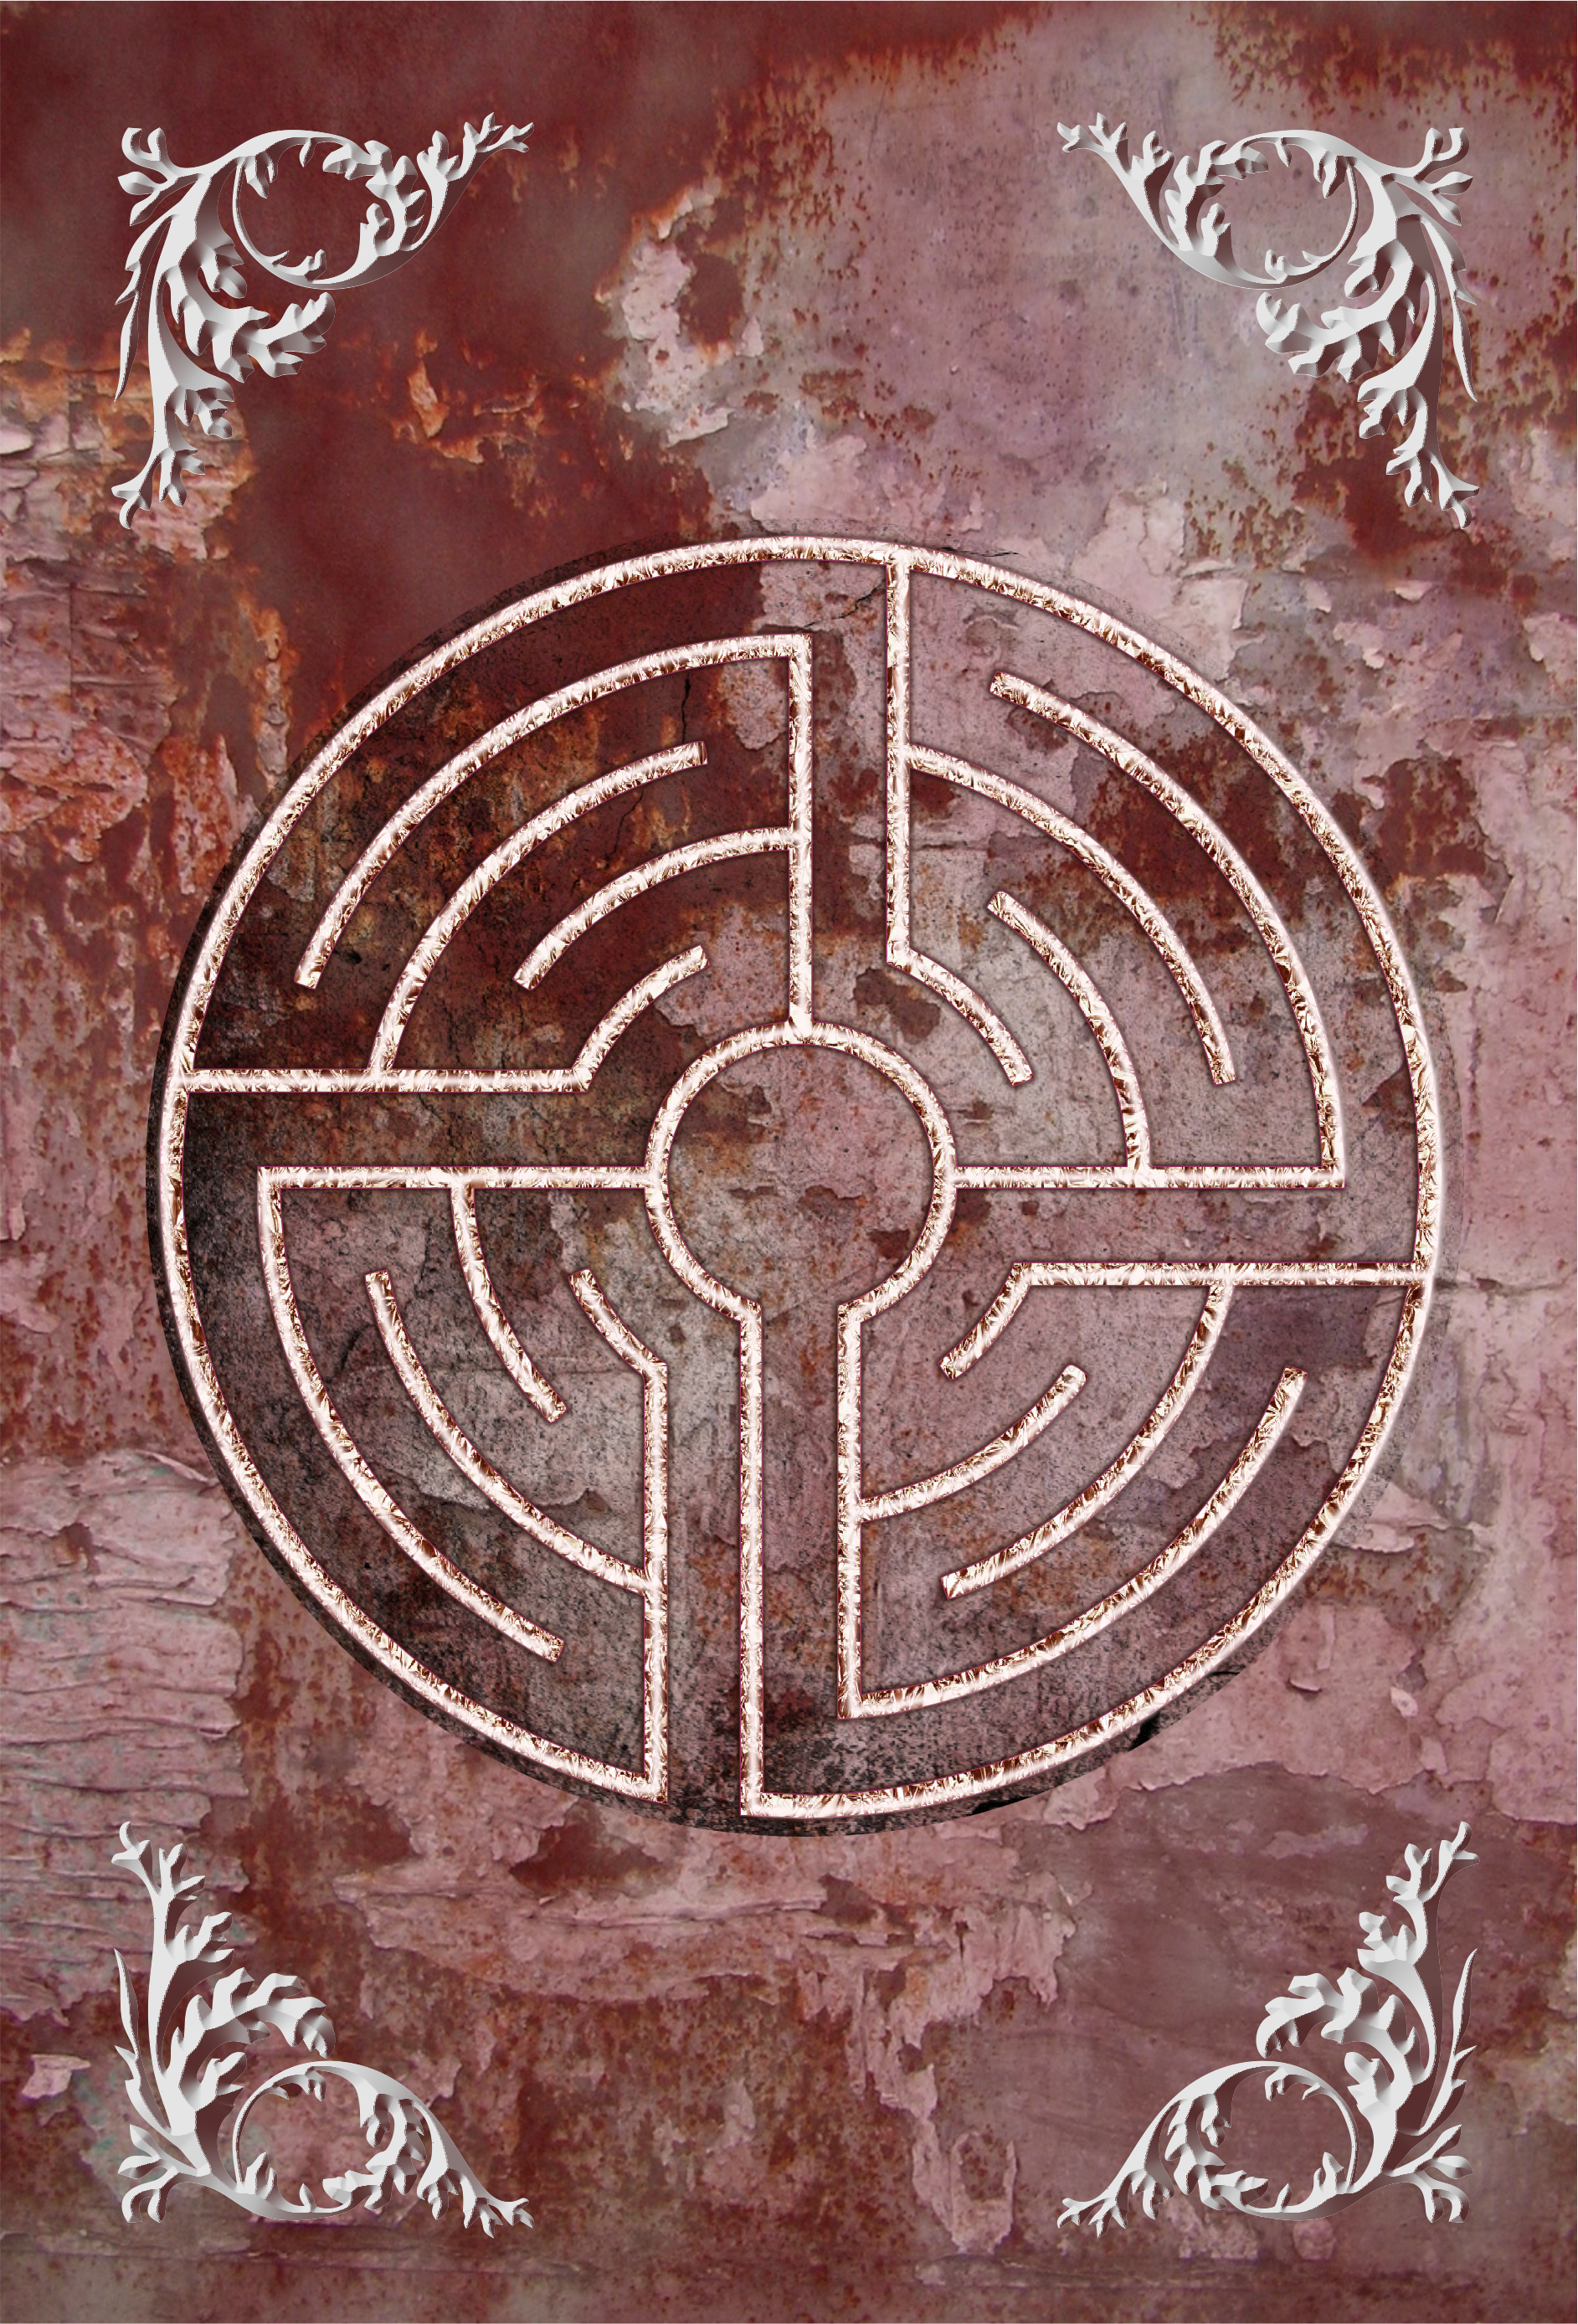 mindful tracing art, labyrinth, finger labyrinth, meditation, mindfulness, therapy, journaling, stress, anxiety, anger, PTSD, ADHD, autism, management